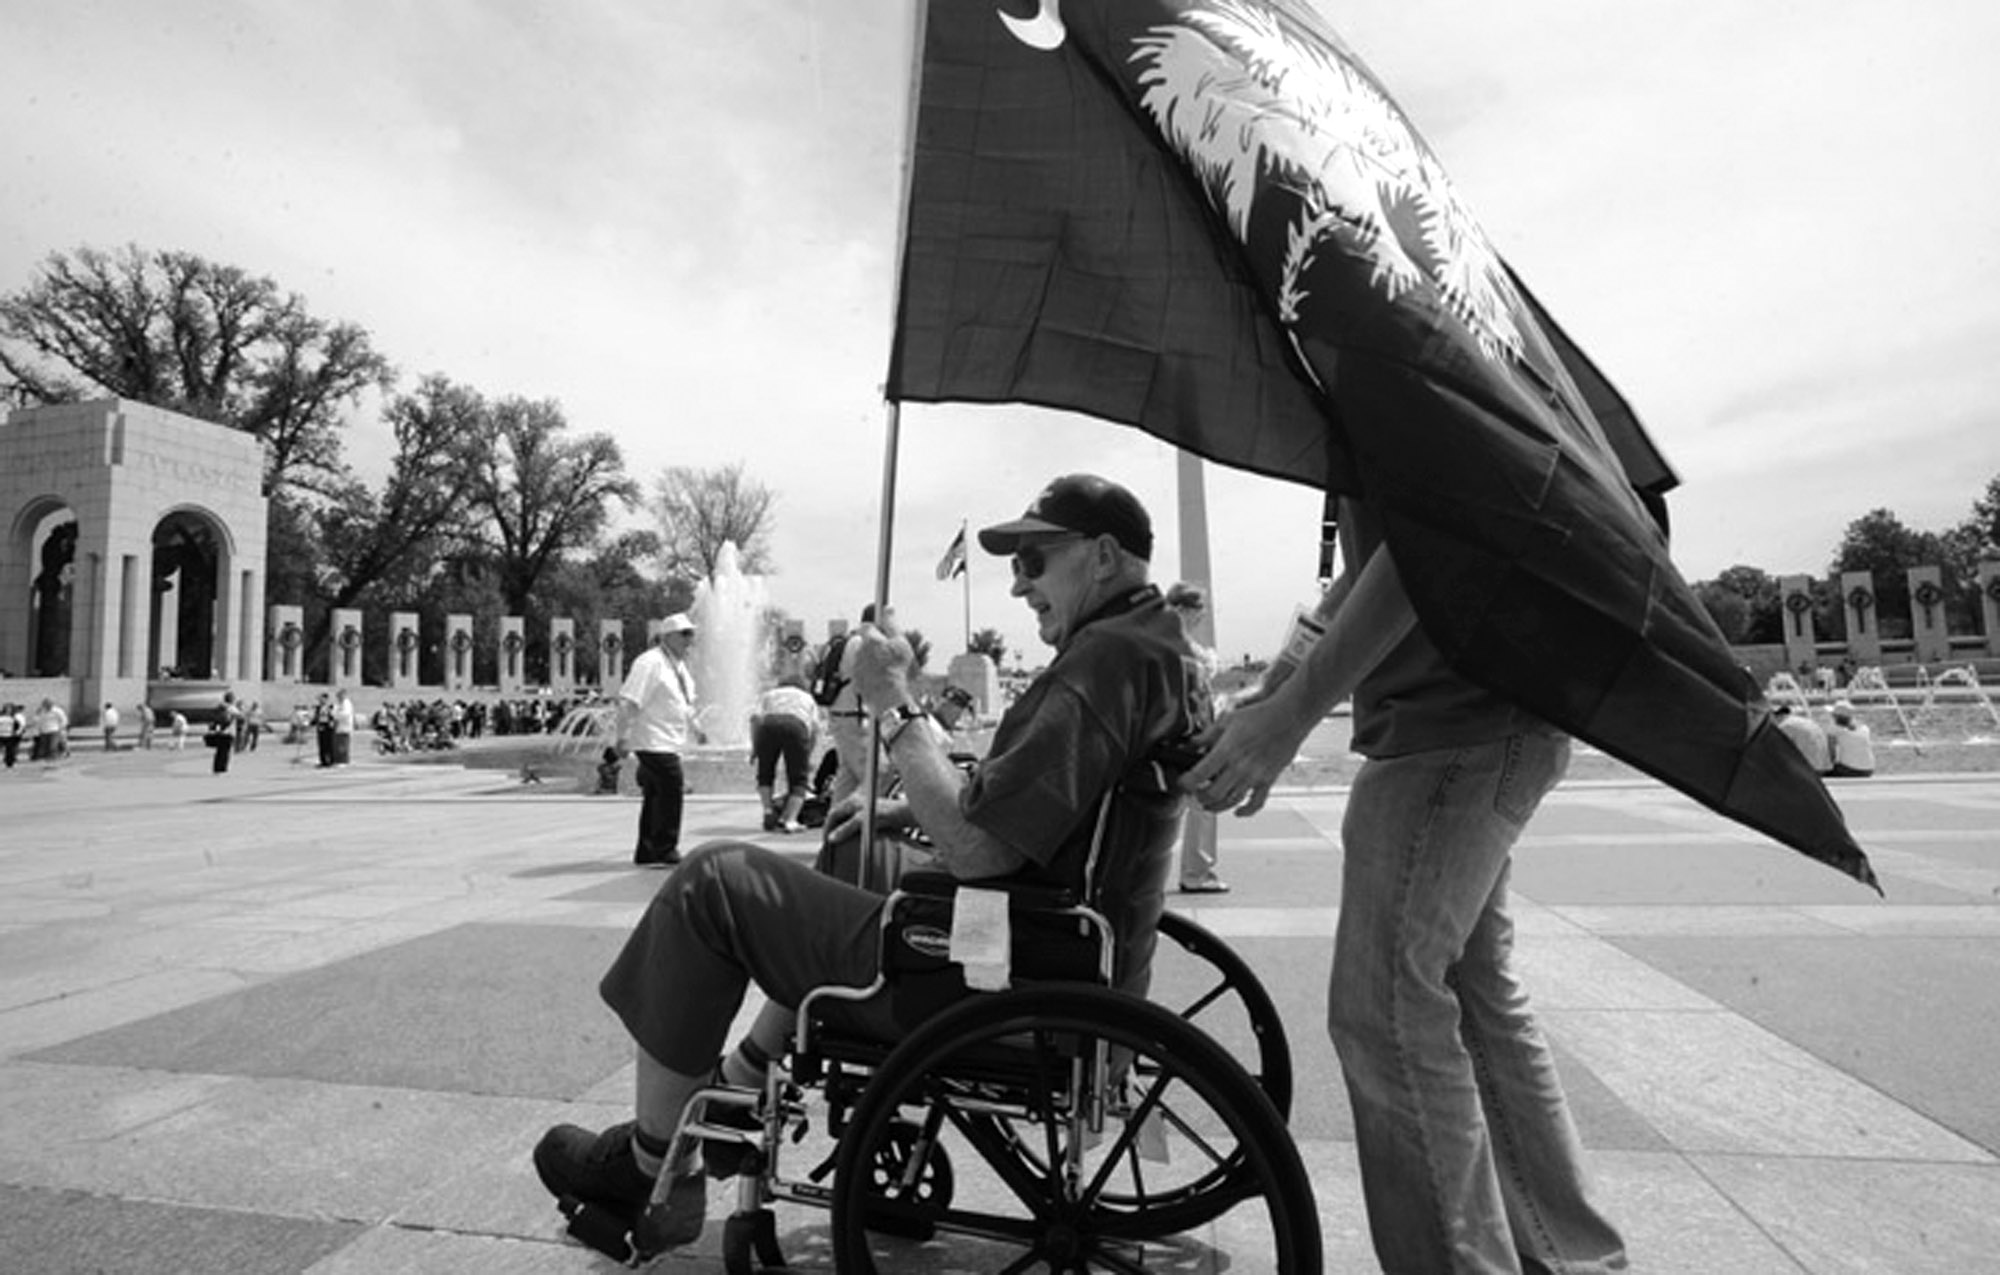  A veteran carries a South Carolina state flag through the World War II Memorial in Washington, D.C. He was part of a group of South Carolina World War II veterans to travel to Washington as part of Honor Flight Upstate. 